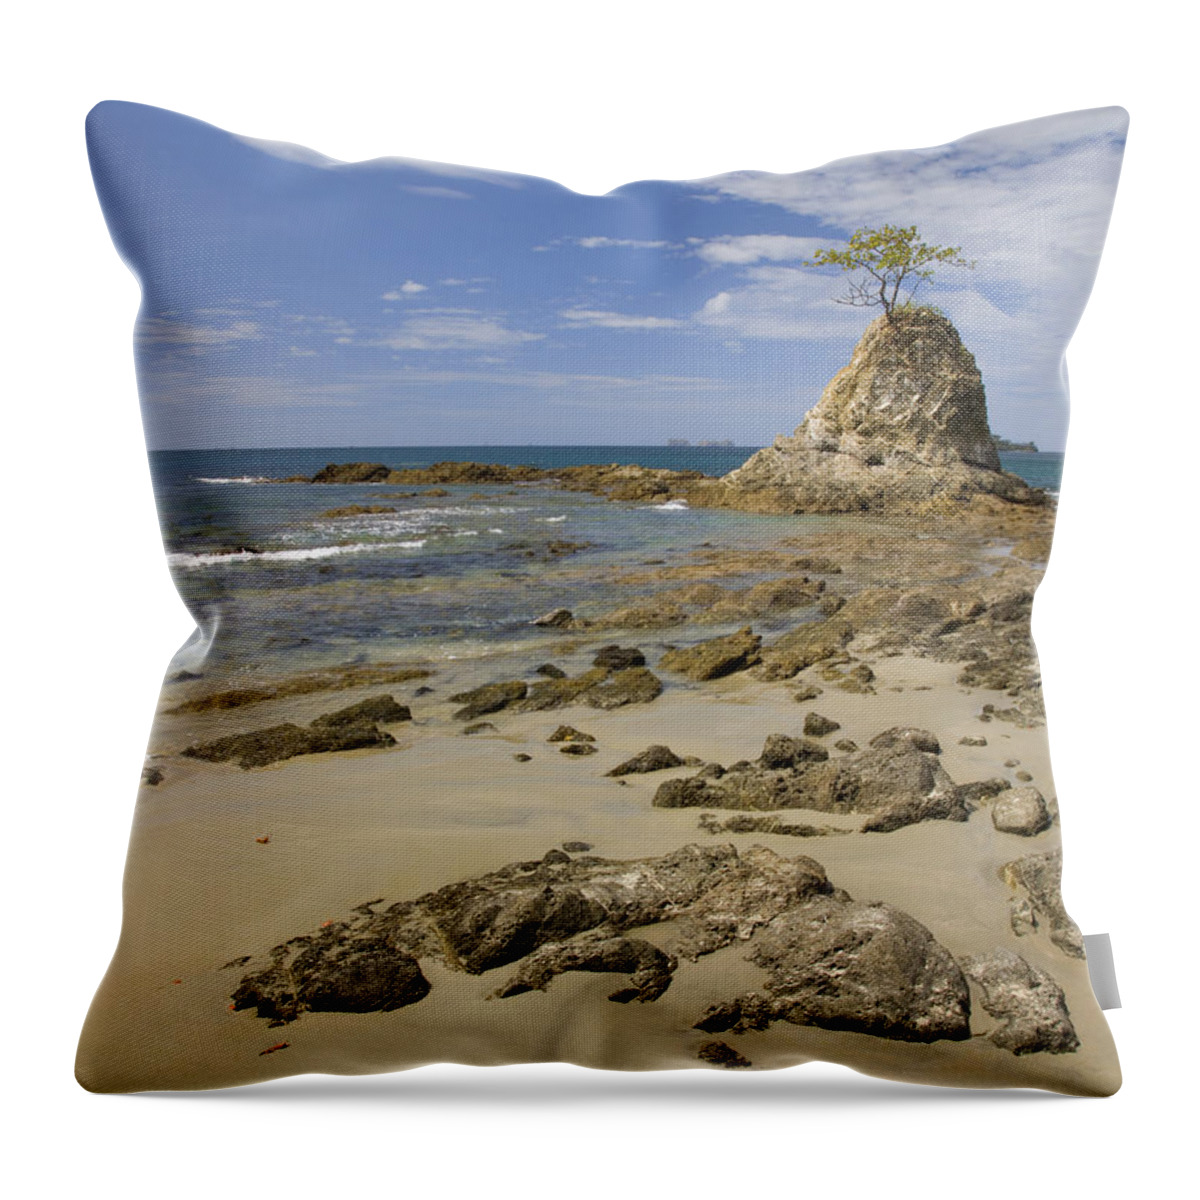 00429552 Throw Pillow featuring the photograph Point With Tree On Penca Beach Costa by Tim Fitzharris